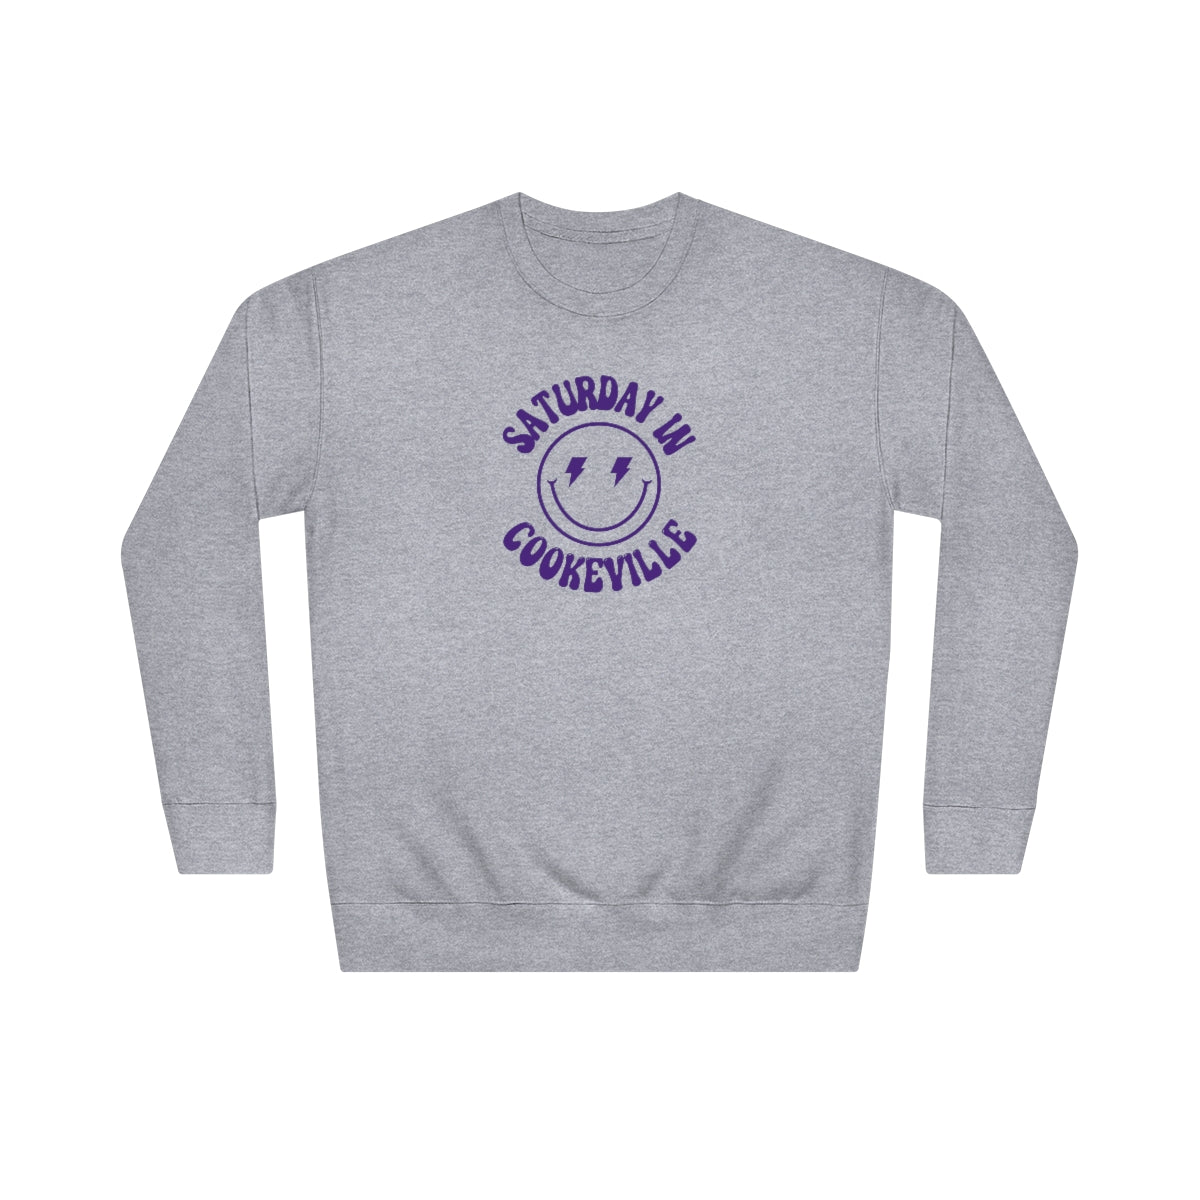 Smiley Cookeville Crew Sweatshirt - GG - CH